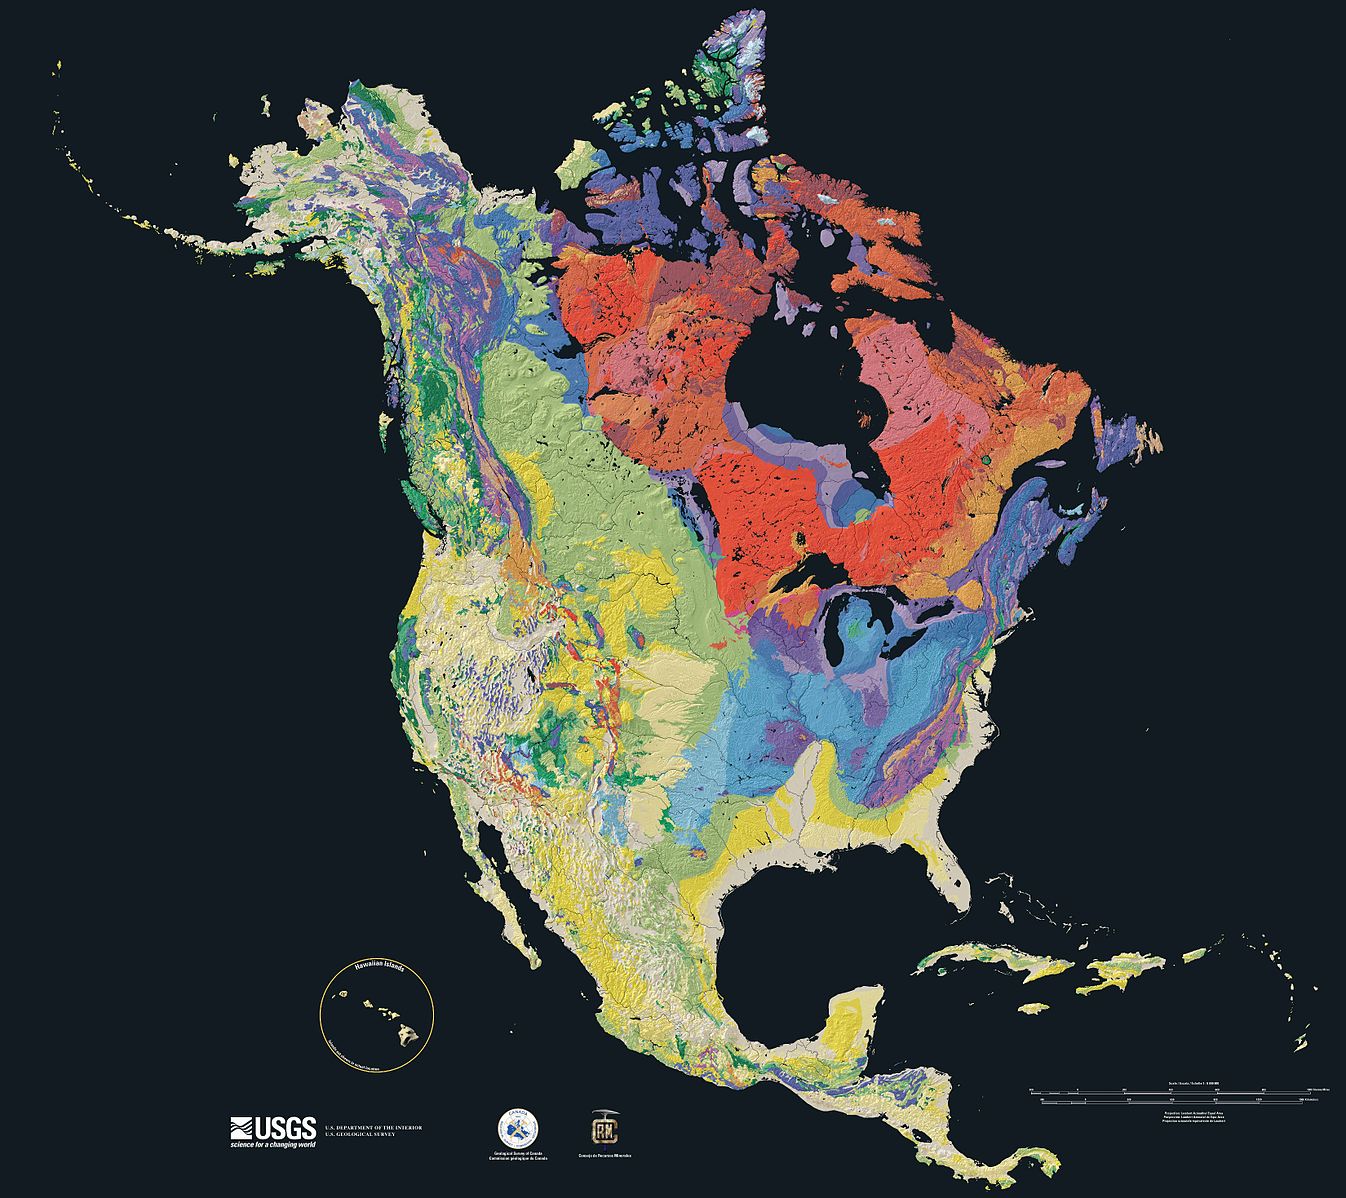 Relief map showing the varying age of bedrock underlying North America